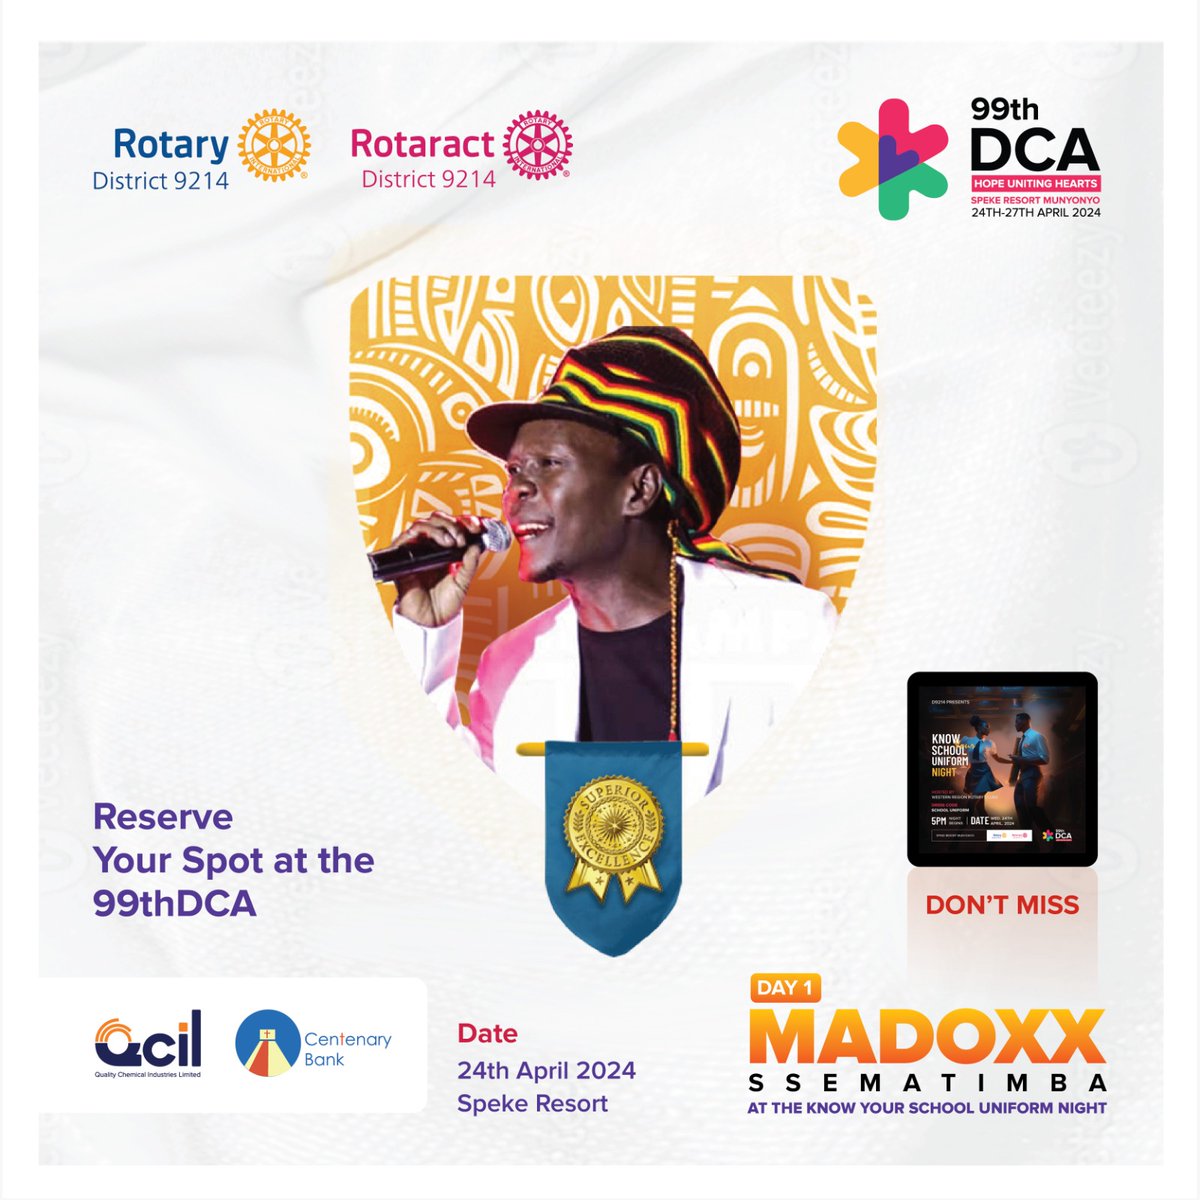 Get ready to be blown away! Each theme night at the #99thDCA will feature a celebrated artist performing live on stage! From electrifying performances to soul-stirring melodies, Munyonyo is about to ignite with unforgettable music!